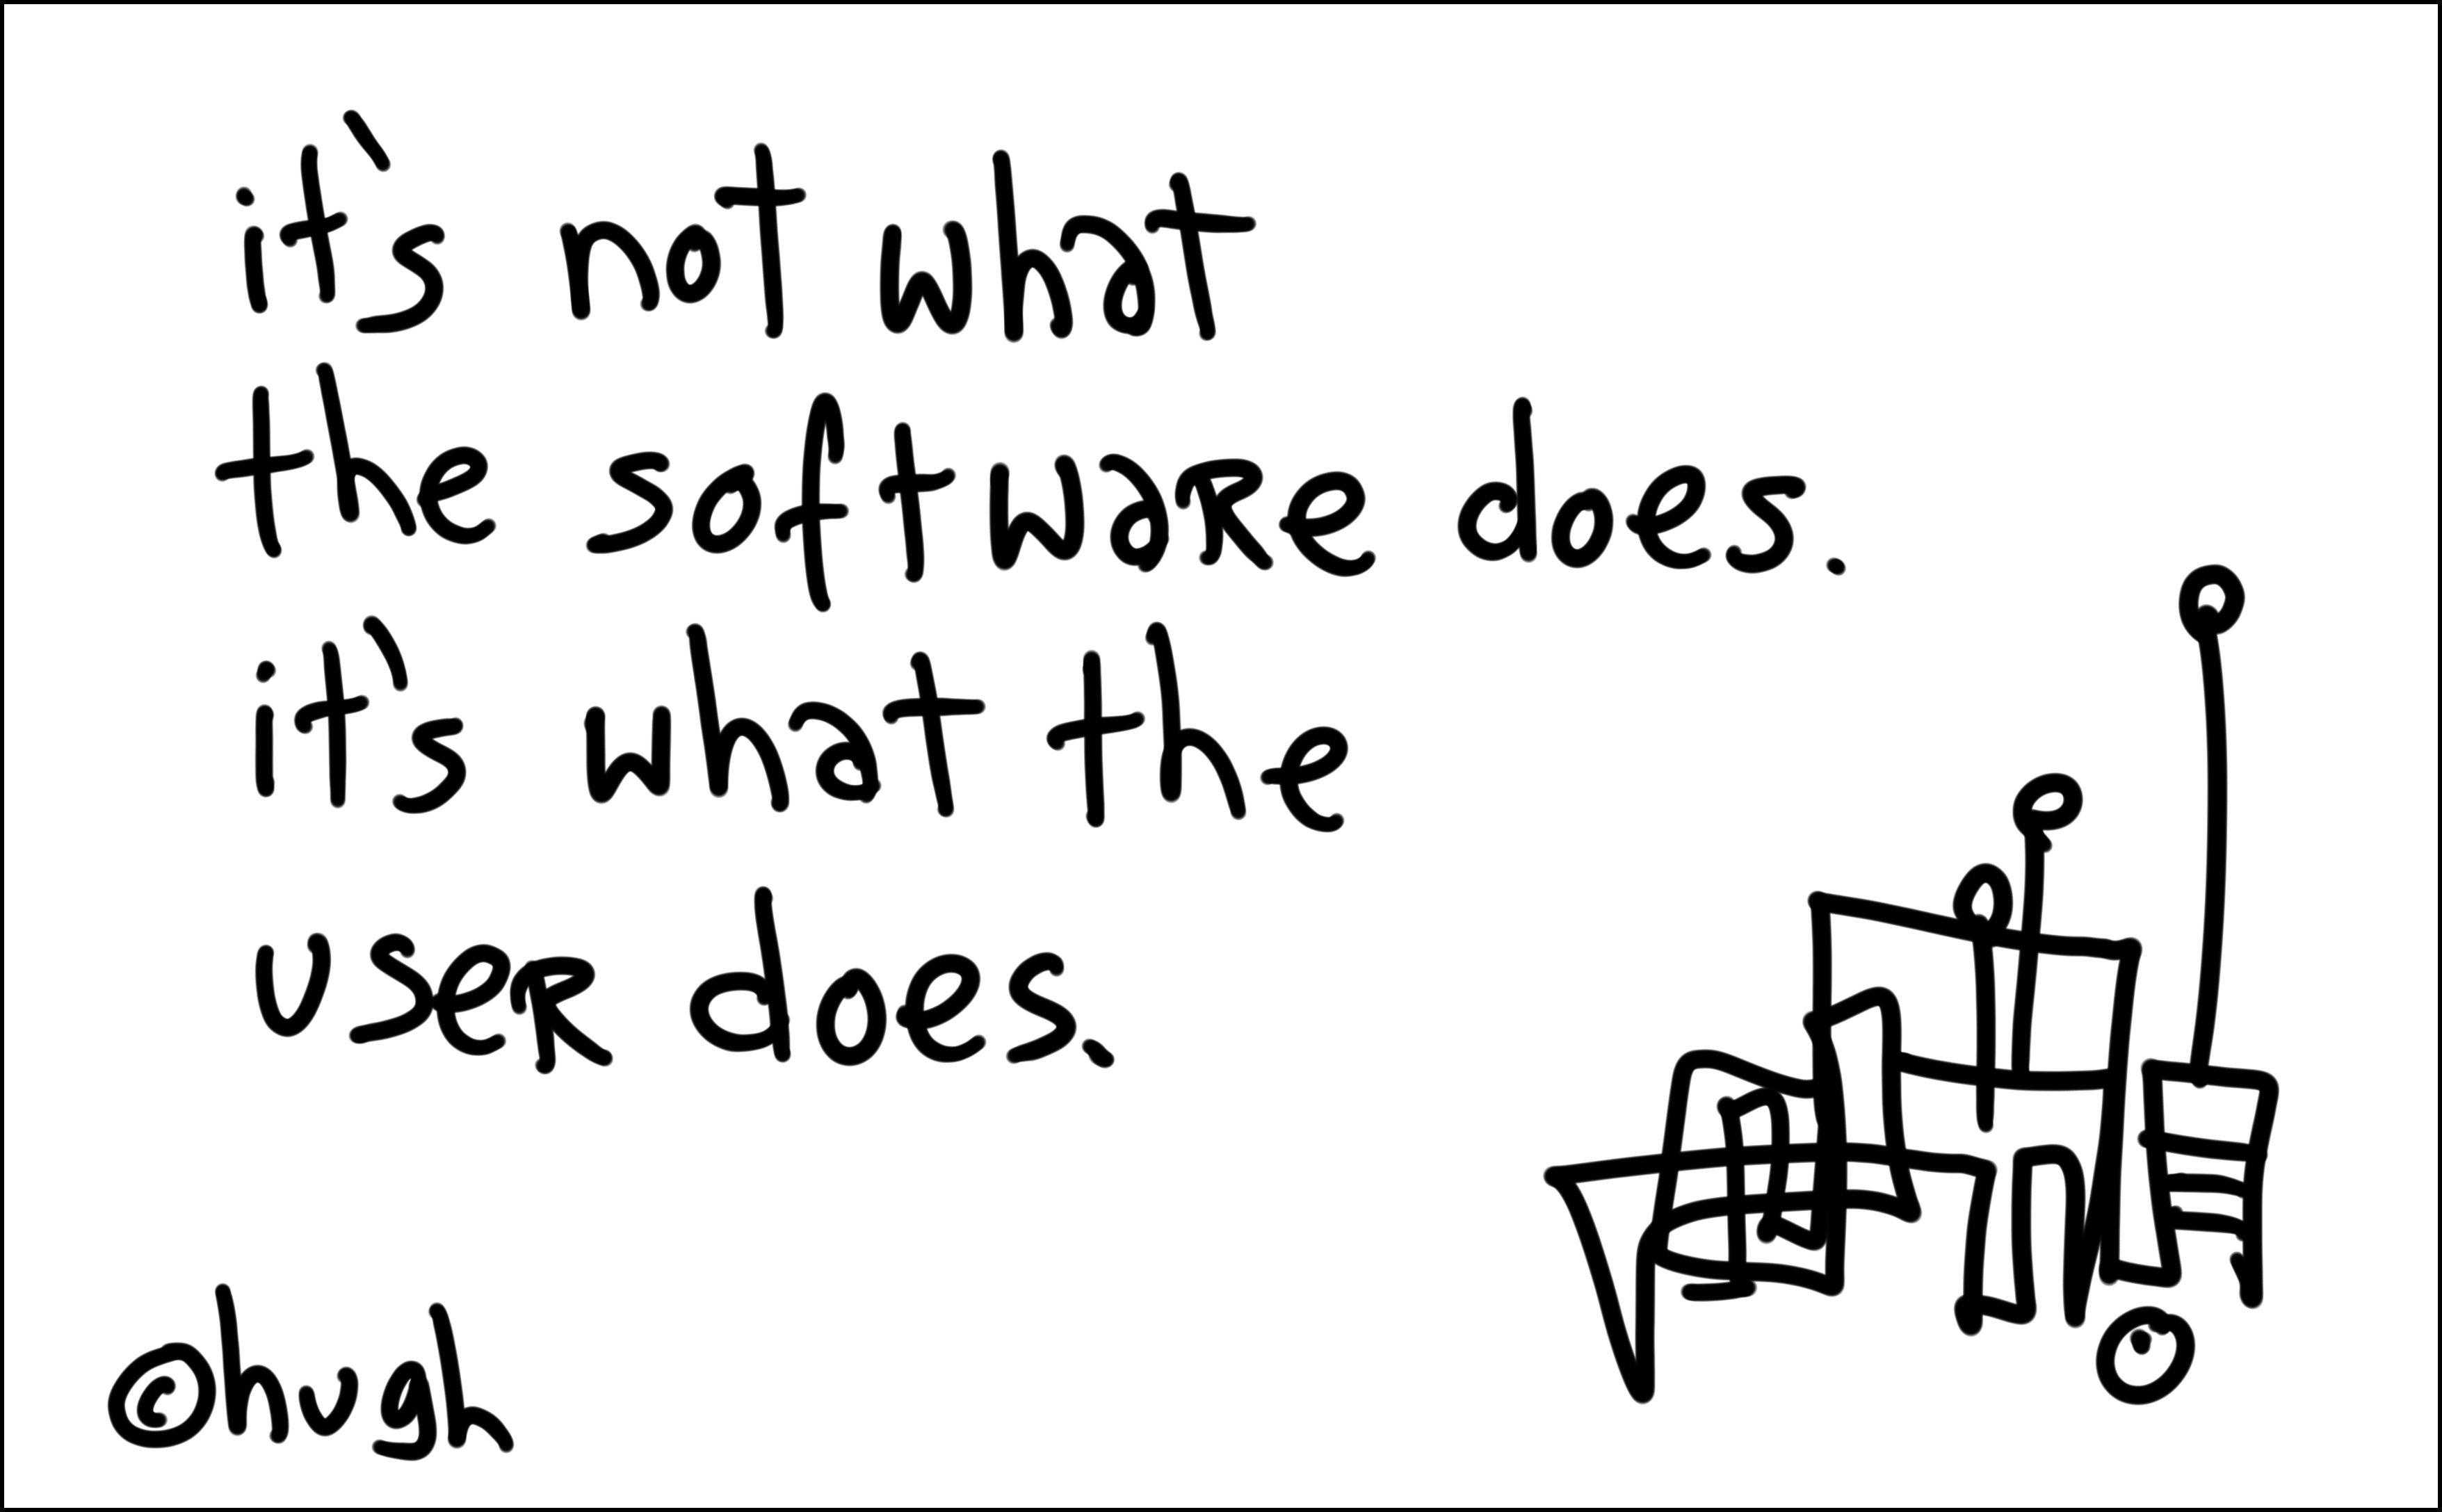 It's not what the software does. It's what the user does.